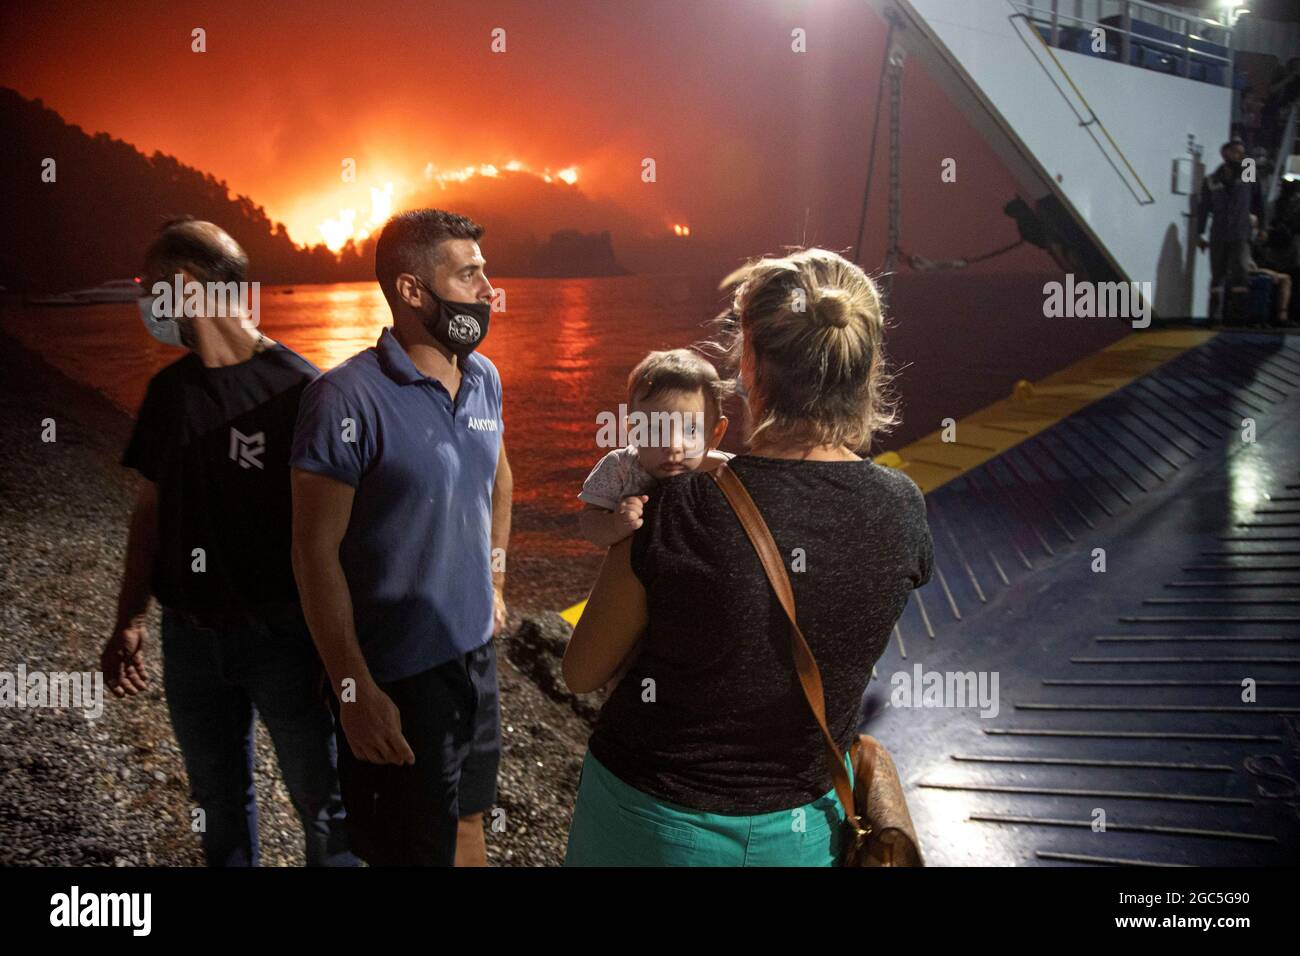 People board a ferry during evacuation as a wildfire burns in the village of Limni, on the island of Evia, Greece, August 6, 2021. Picture taken August 6, 2021. REUTERS/Nicolas Economou Stock Photo